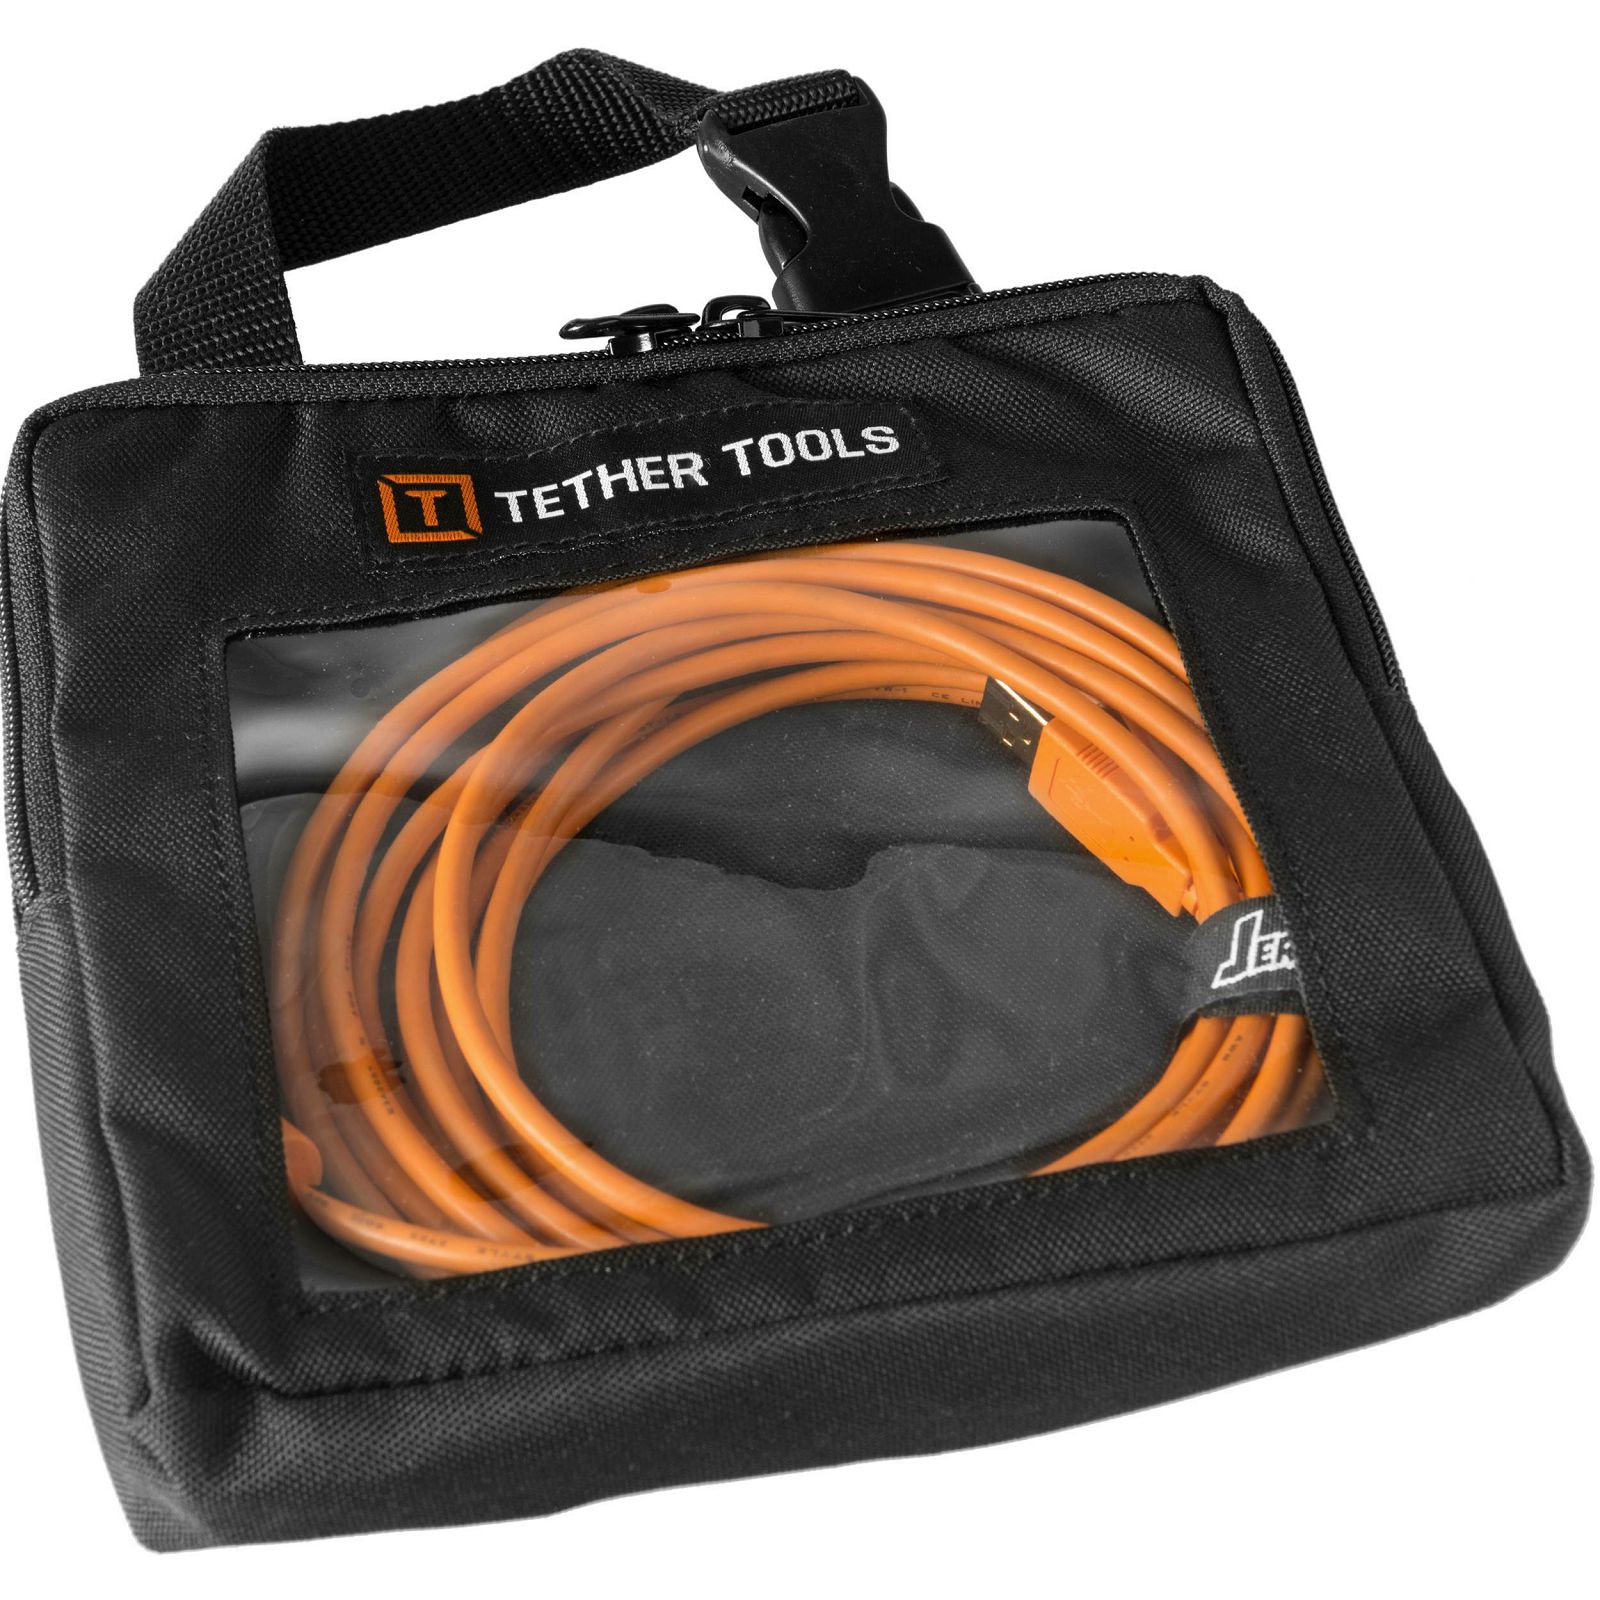 Tether Tools Tether Pro Cable Organization Case - STD (8"x8"x2") (TTPCC)